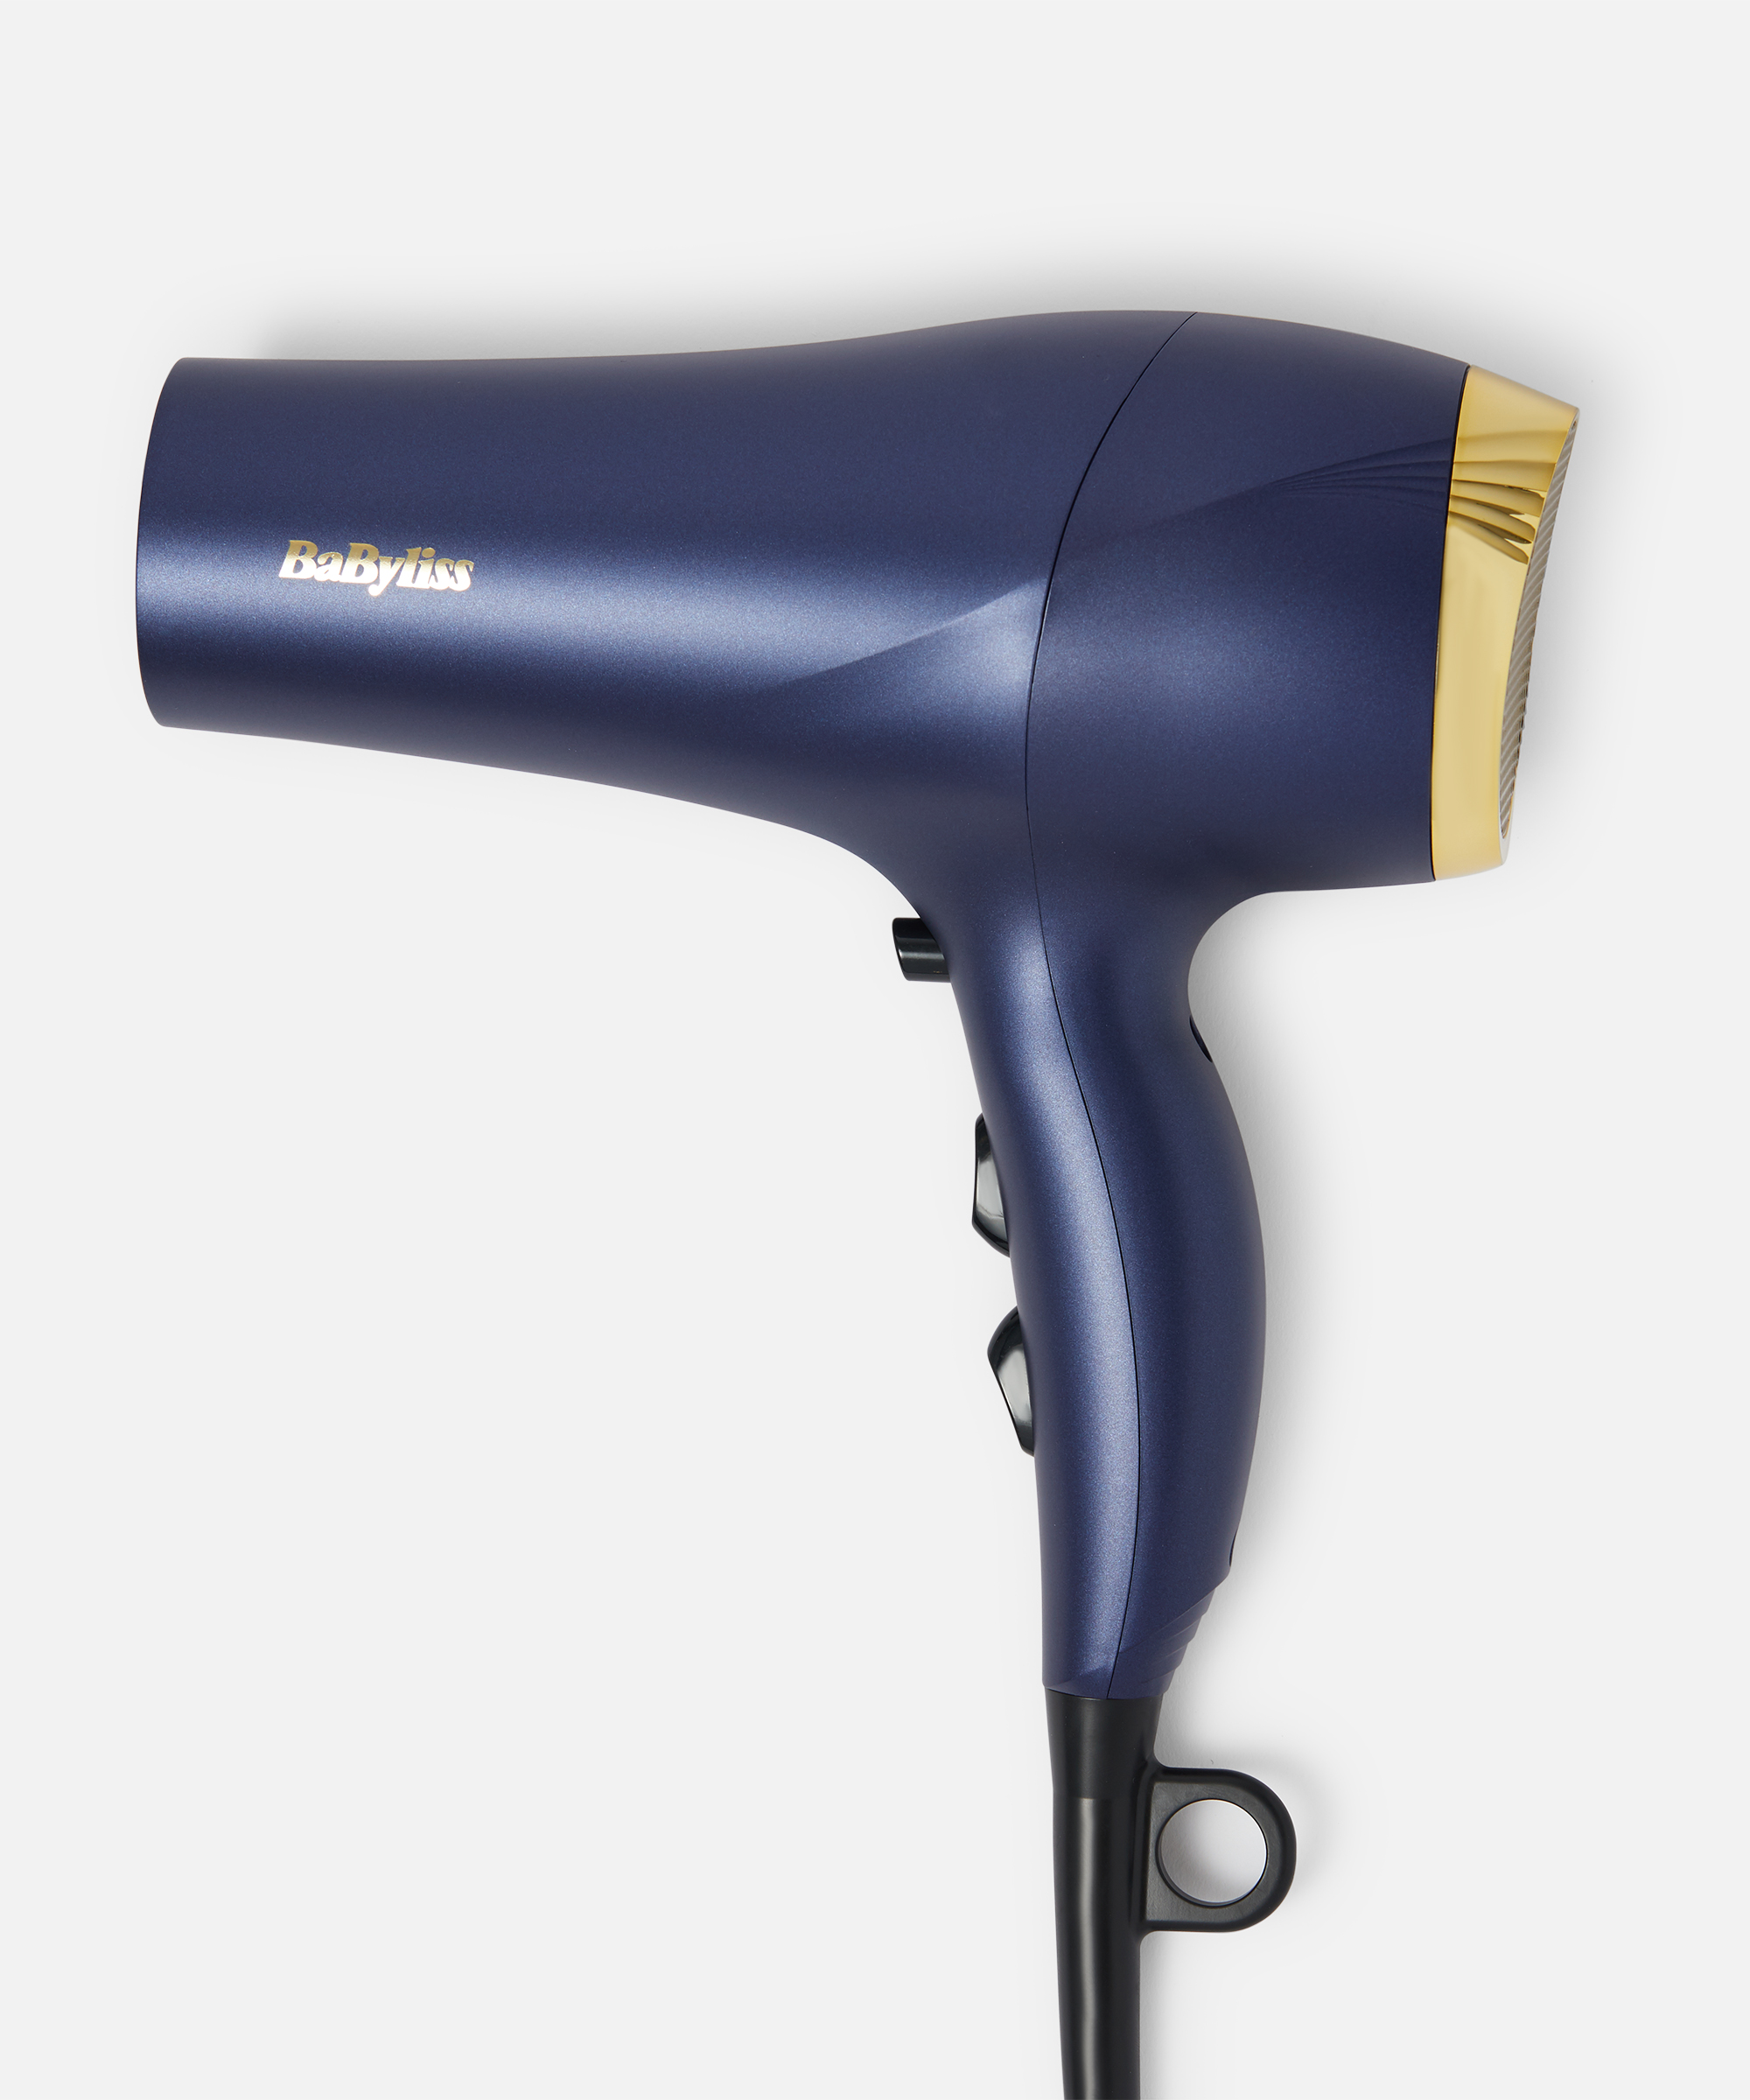 BaByliss Midnight Luxe 2300 BEAUTY Hair Dryer at BAY